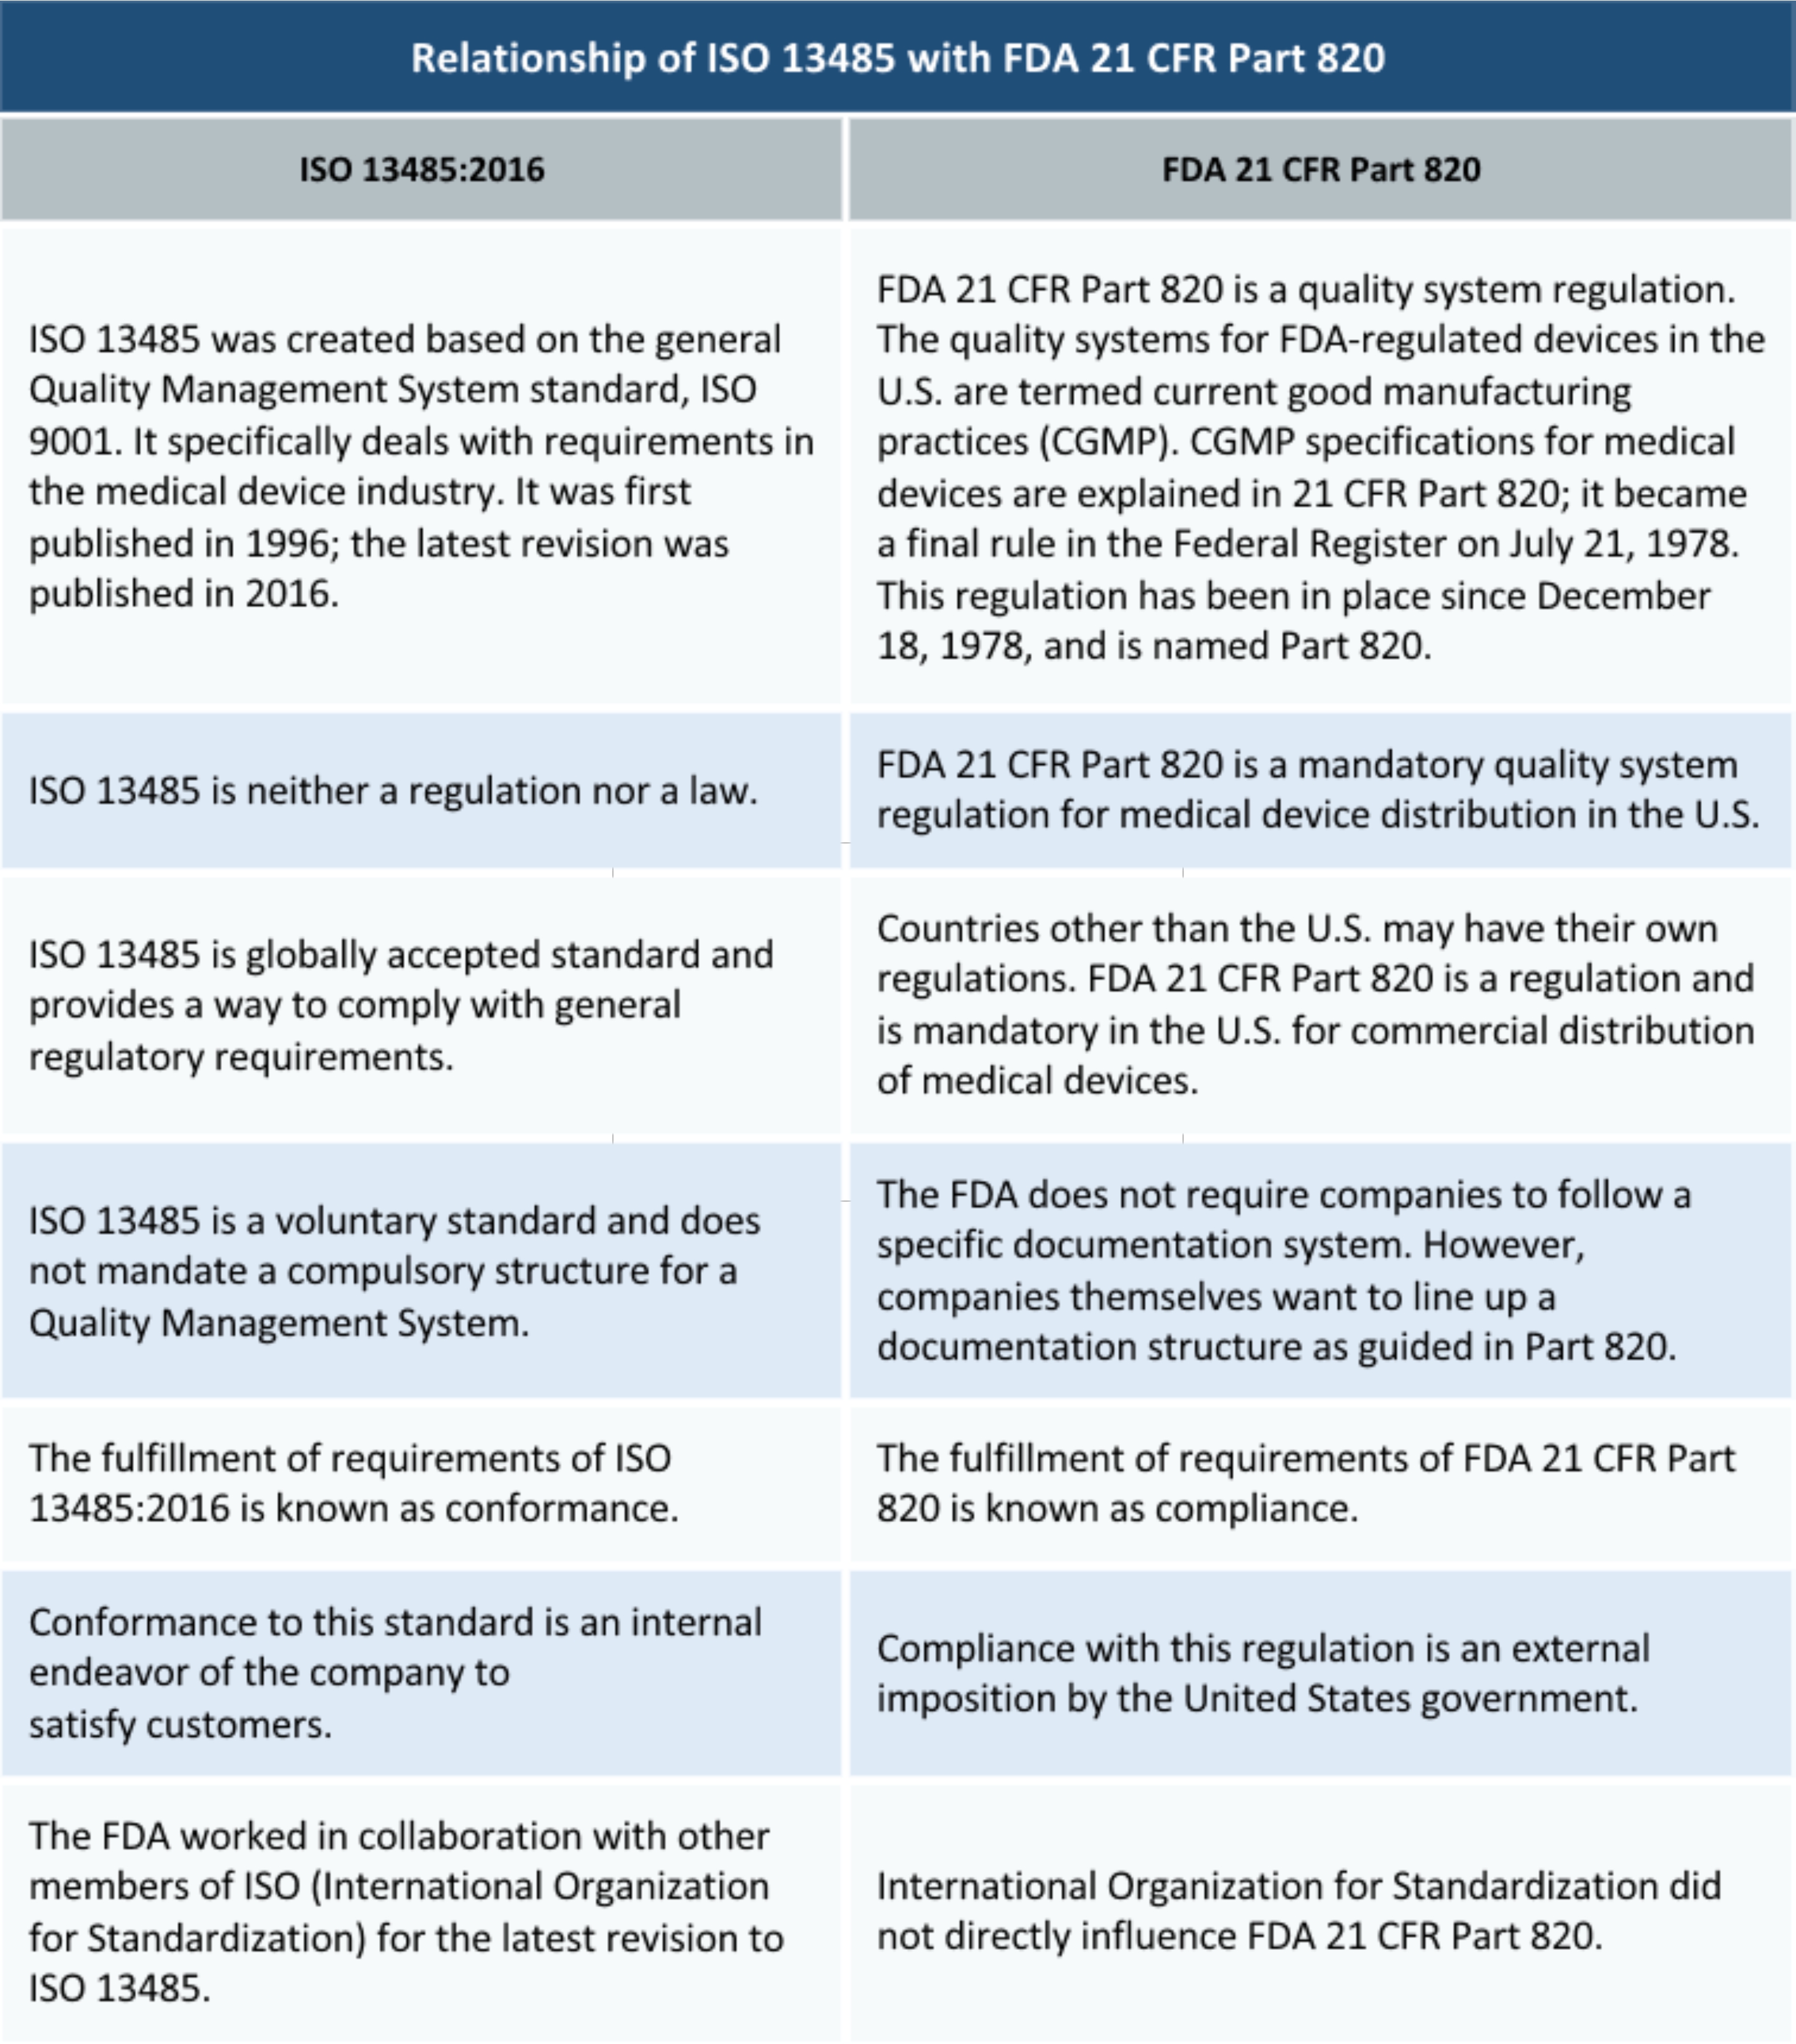 Differences and similarities between FDA 21 CFR Part 820 and ISO 13485